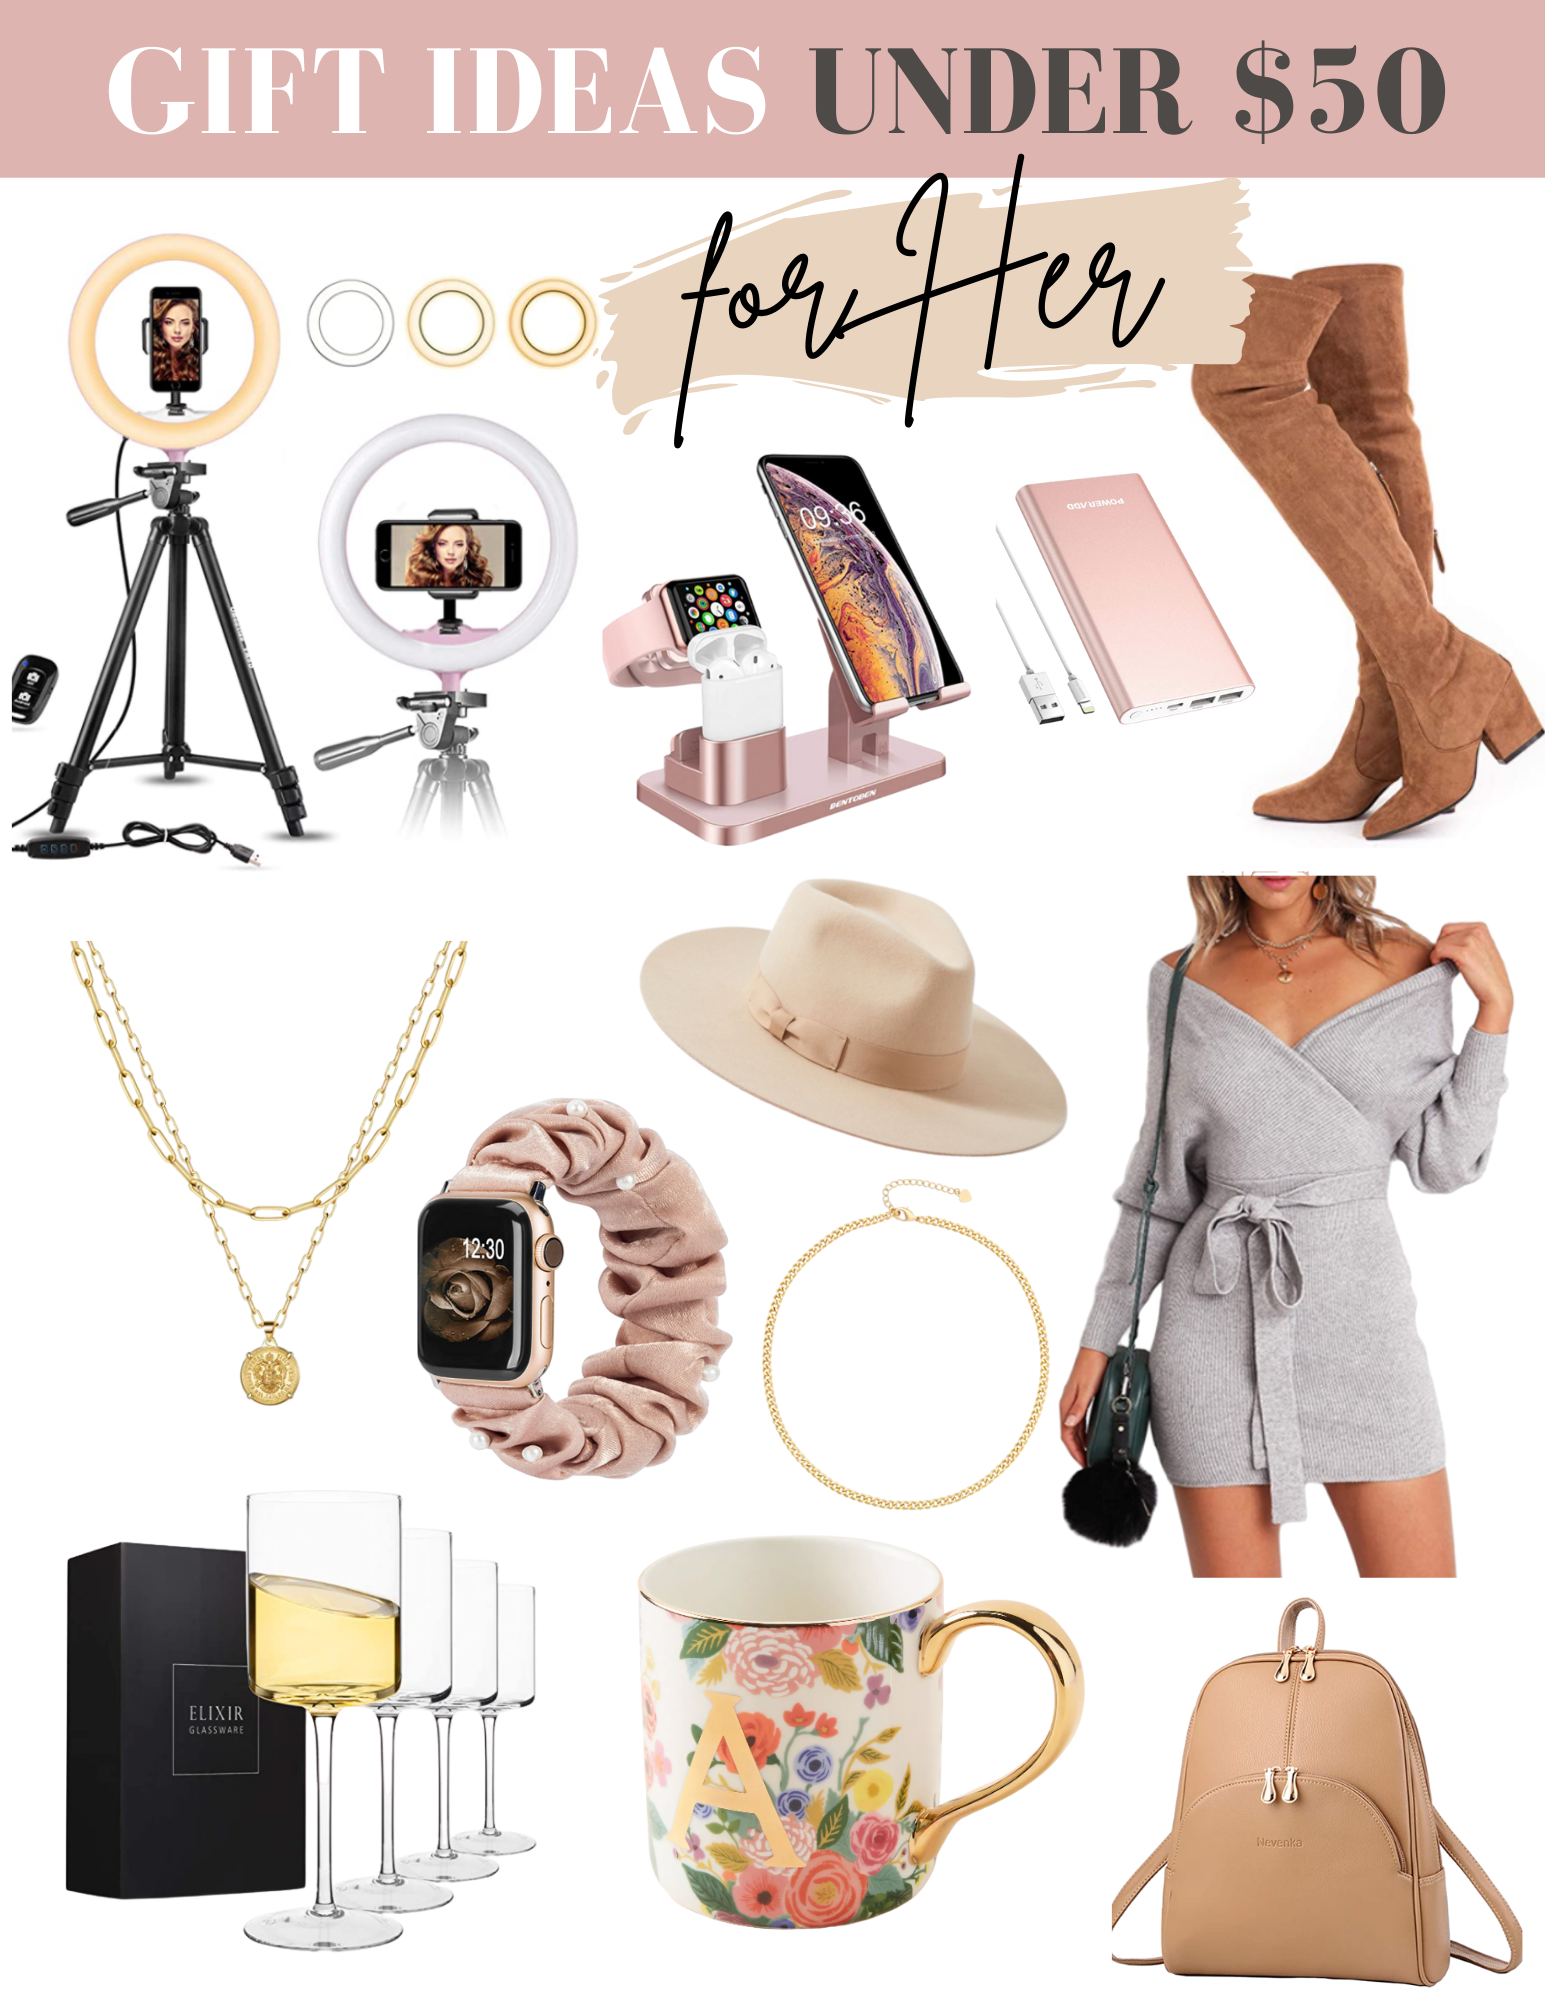 Holiday Gift Ideas for Her Under $50 - My Styled Life